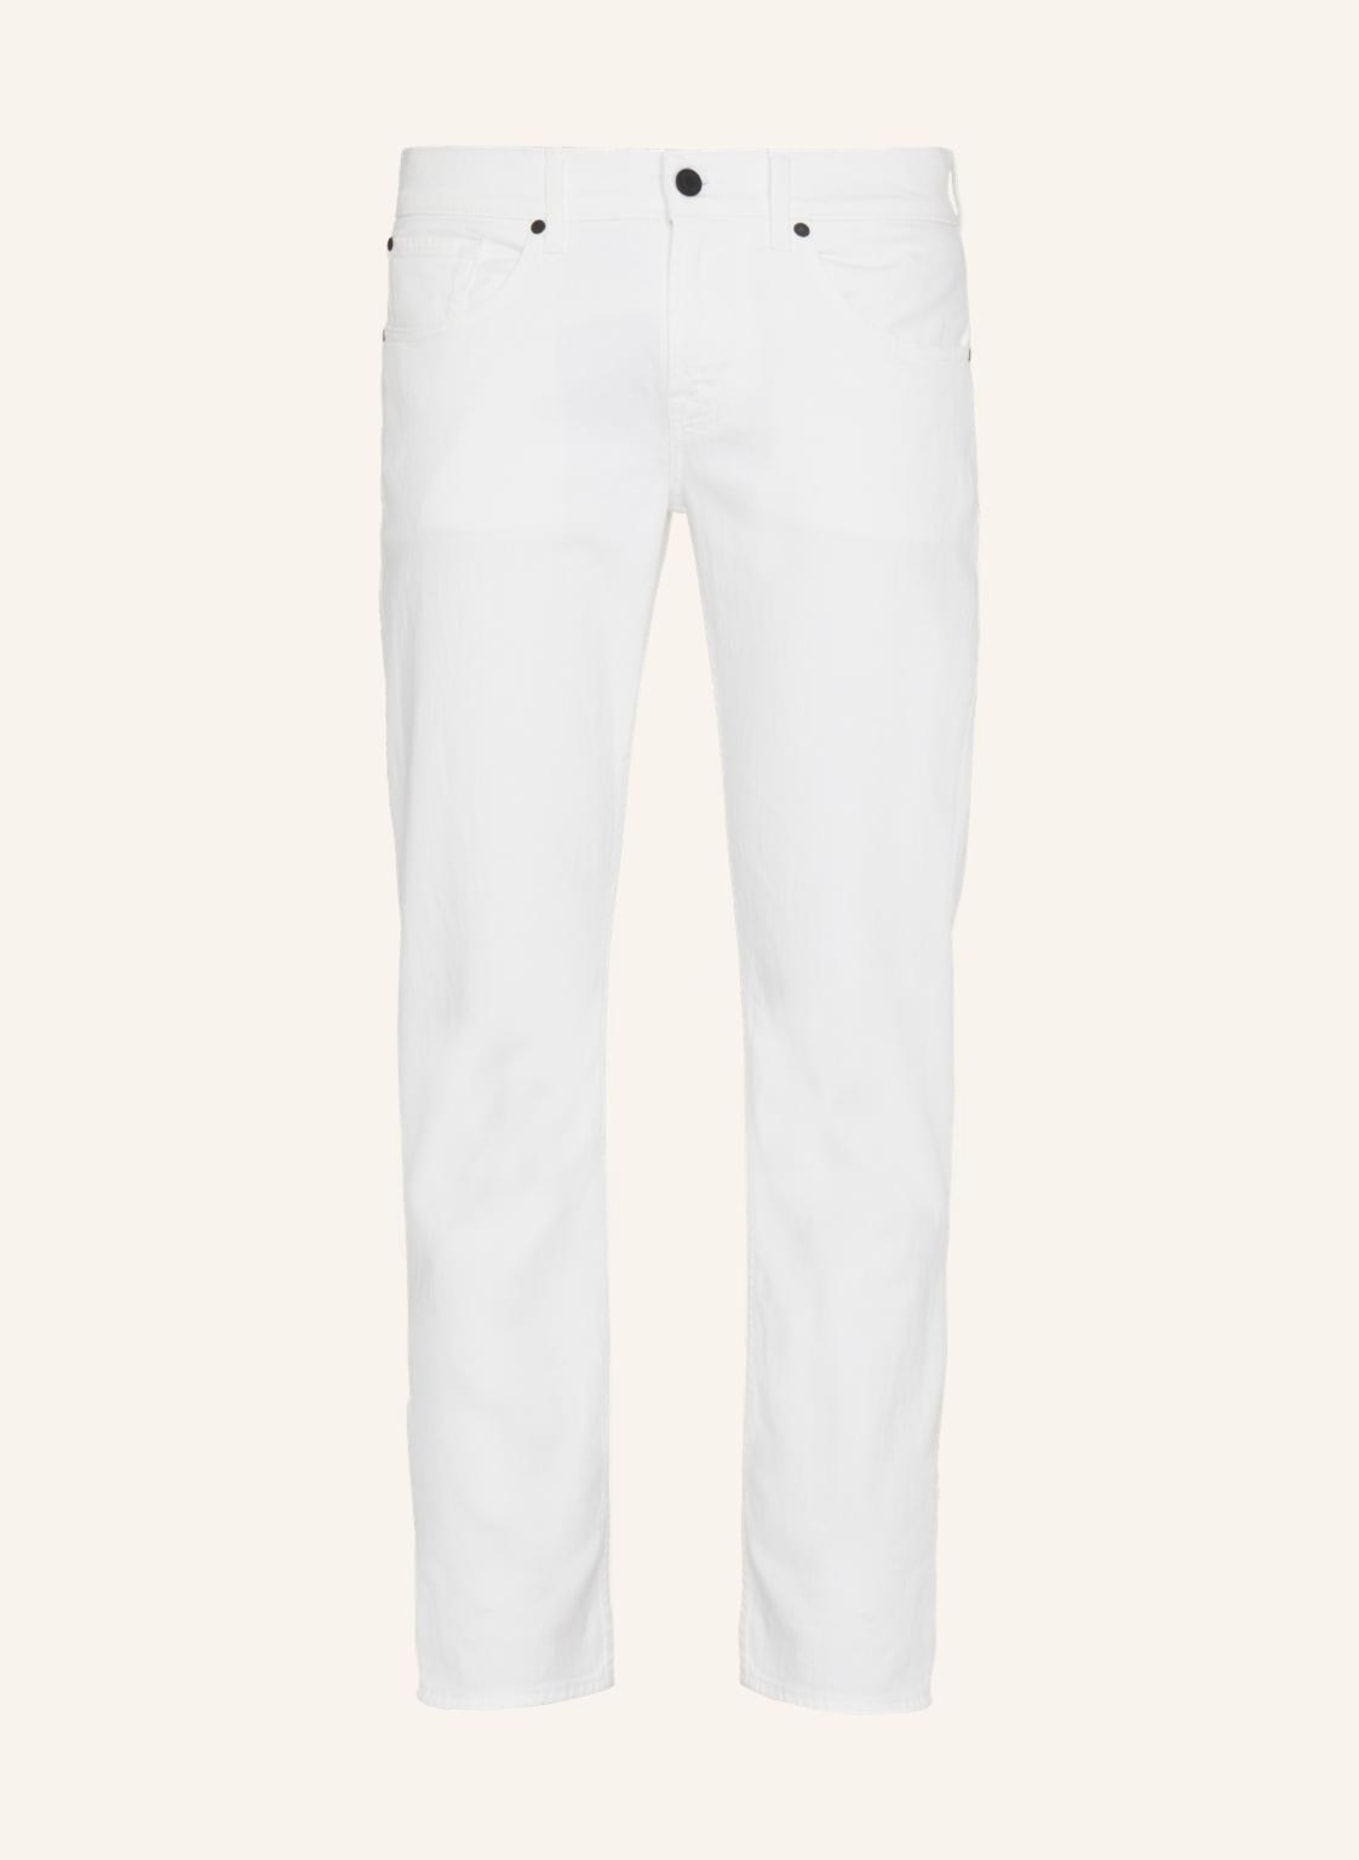 7 for all mankind Jeans SLIMMY TAPERED Slim fit, Farbe: WEISS (Bild 3)